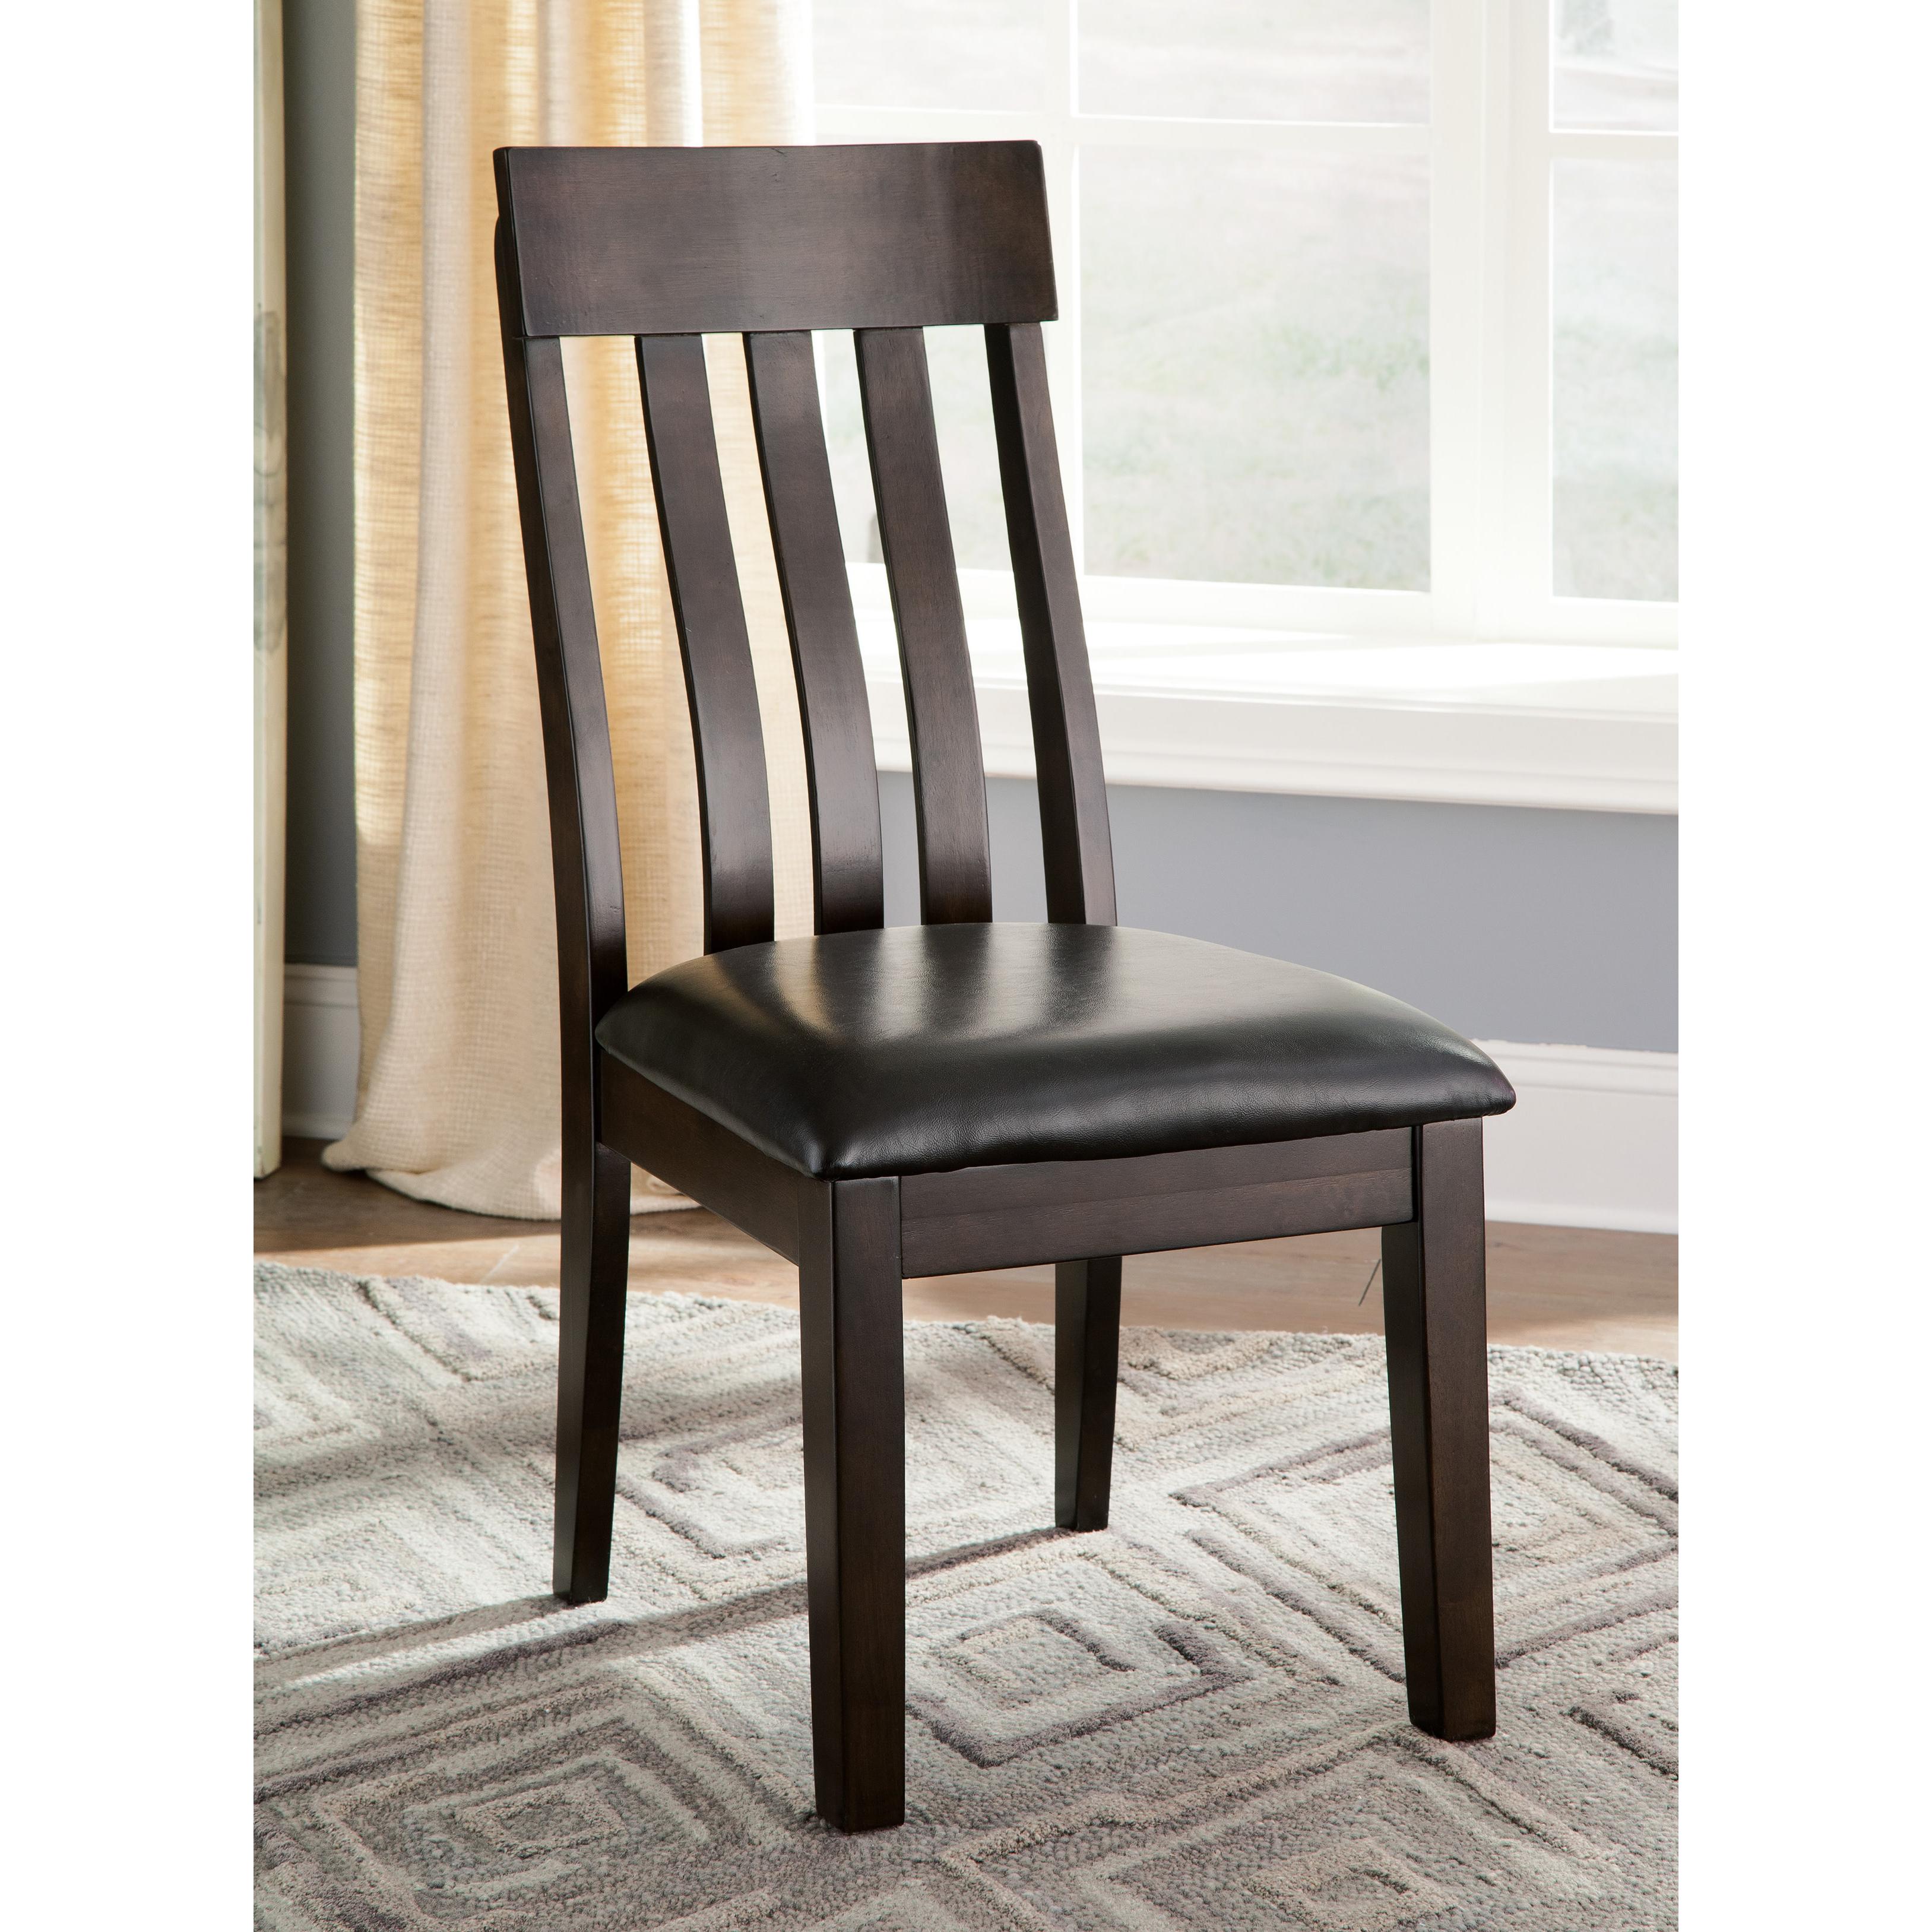 Signature Design by Ashley Haddigan Dining Chair D596-01